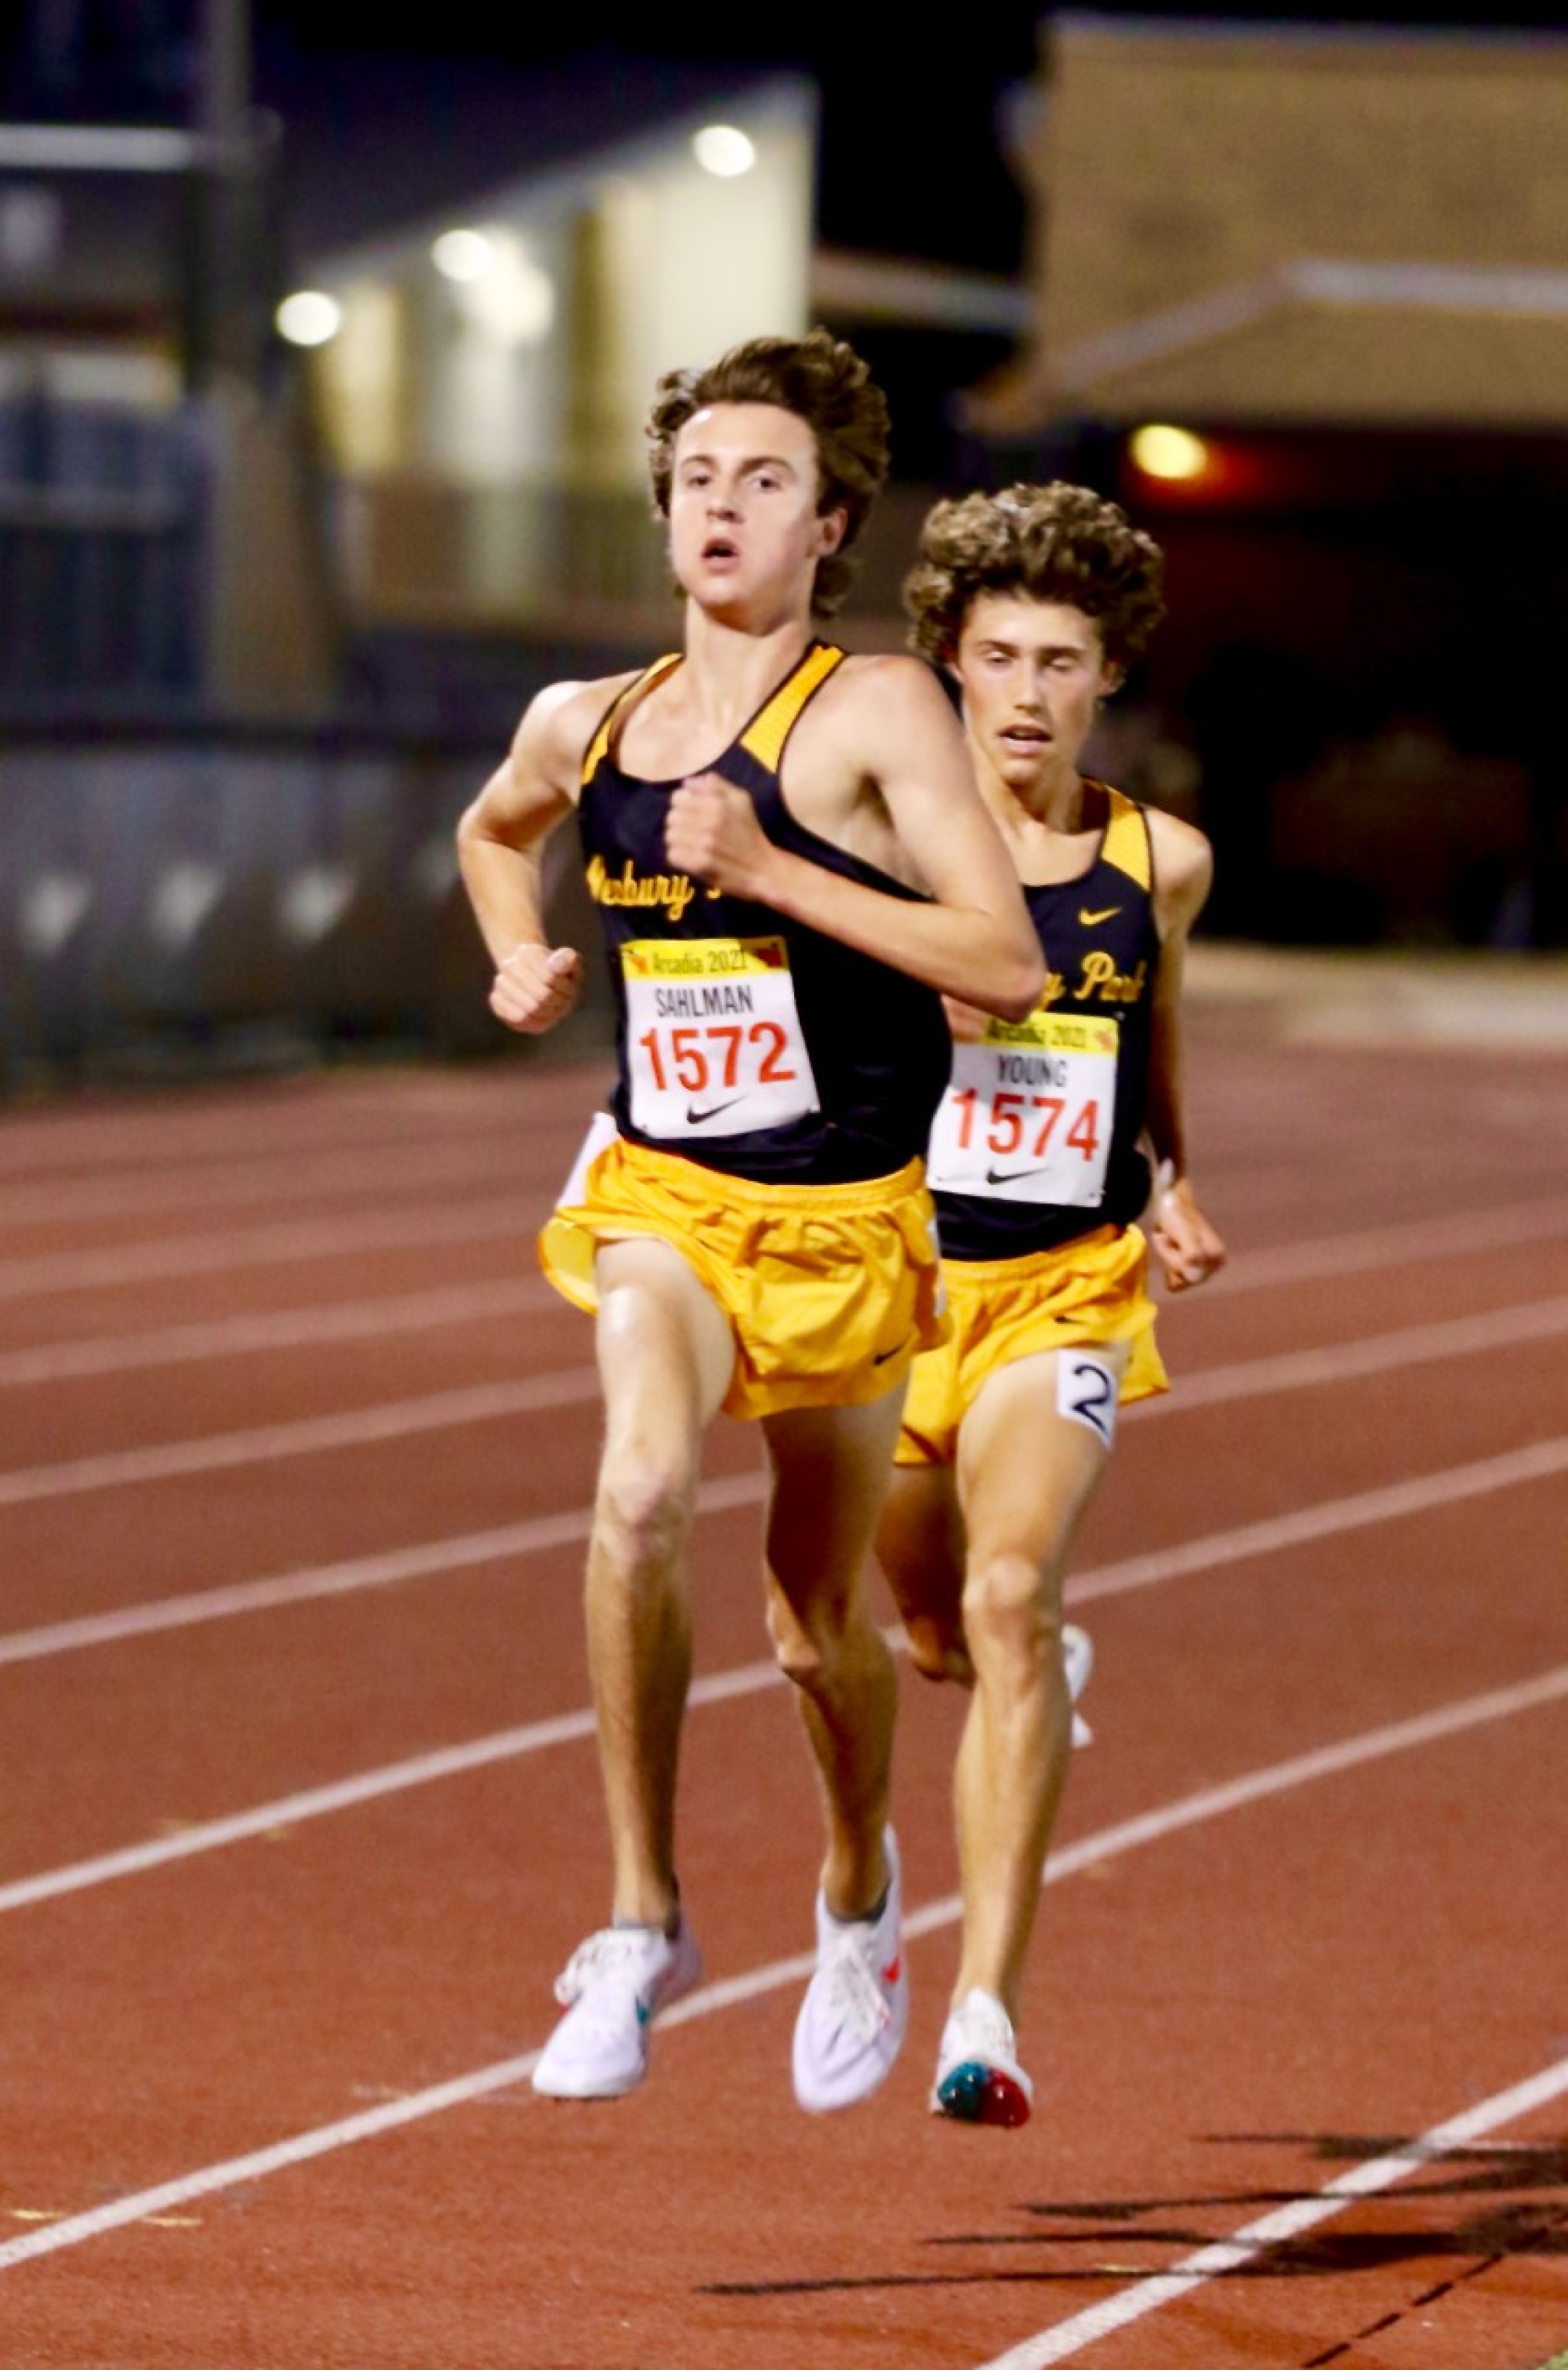 Colin Sahlman, a junior member of Newbury Park, sprints to the finish line on the left 